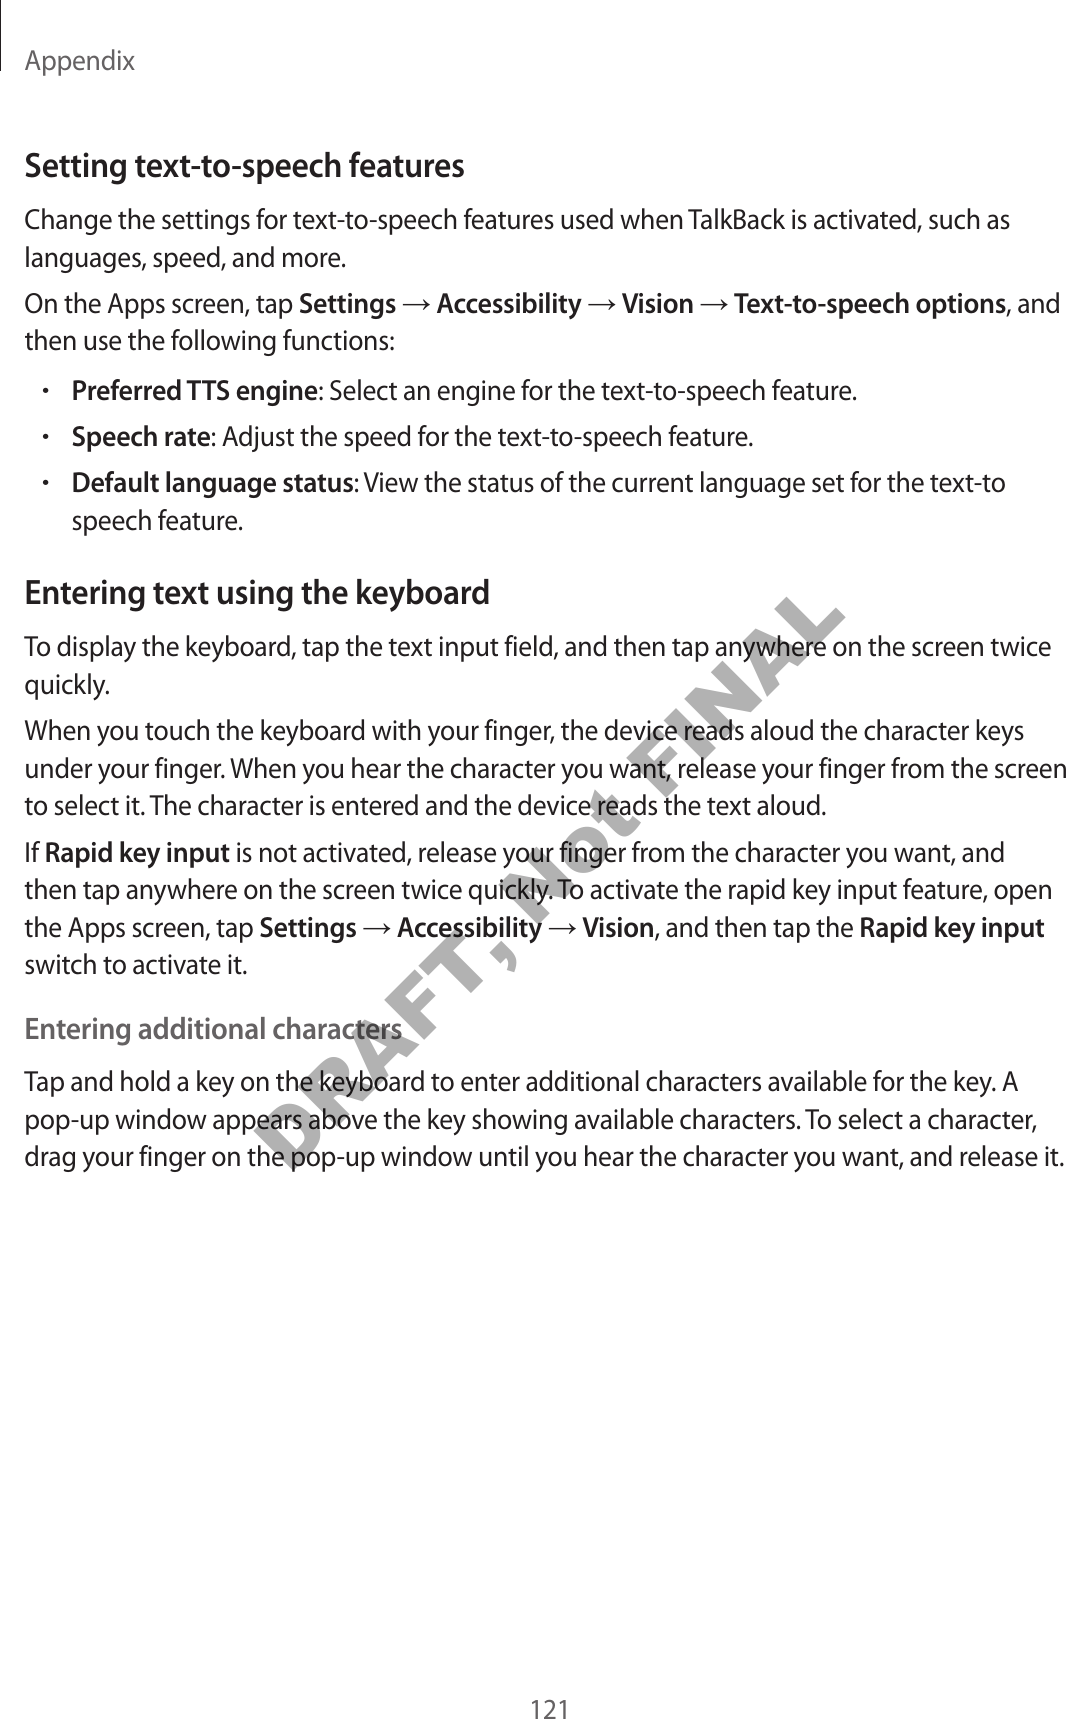 Appendix121Setting text-to-speech featuresChange the settings for text-to-speech features used when TalkBack is activated, such as languages, speed, and more.On the Apps screen, tap Settings  Accessibility  Vision  Text-to-speech options, and then use the following functions:•Preferred TTS engine: Select an engine for the text-to-speech feature.•Speech rate: Adjust the speed for the text-to-speech feature.•Default language status: View the status of the current language set for the text-to speech feature.Entering text using the keyboardTo display the keyboard, tap the text input field, and then tap anywhere on the screen twice quickly.When you touch the keyboard with your finger, the device reads aloud the character keys under your finger. When you hear the character you want, release your finger from the screen to select it. The character is entered and the device reads the text aloud.If Rapid key input is not activated, release your finger from the character you want, and then tap anywhere on the screen twice quickly. To activate the rapid key input feature, open the Apps screen, tap Settings  Accessibility  Vision, and then tap the Rapid key input switch to activate it.Entering additional charactersTap and hold a key on the keyboard to enter additional characters available for the key. A pop-up window appears above the key showing available characters. To select a character, drag your finger on the pop-up window until you hear the character you want, and release it.DRAFT, Not FINAL